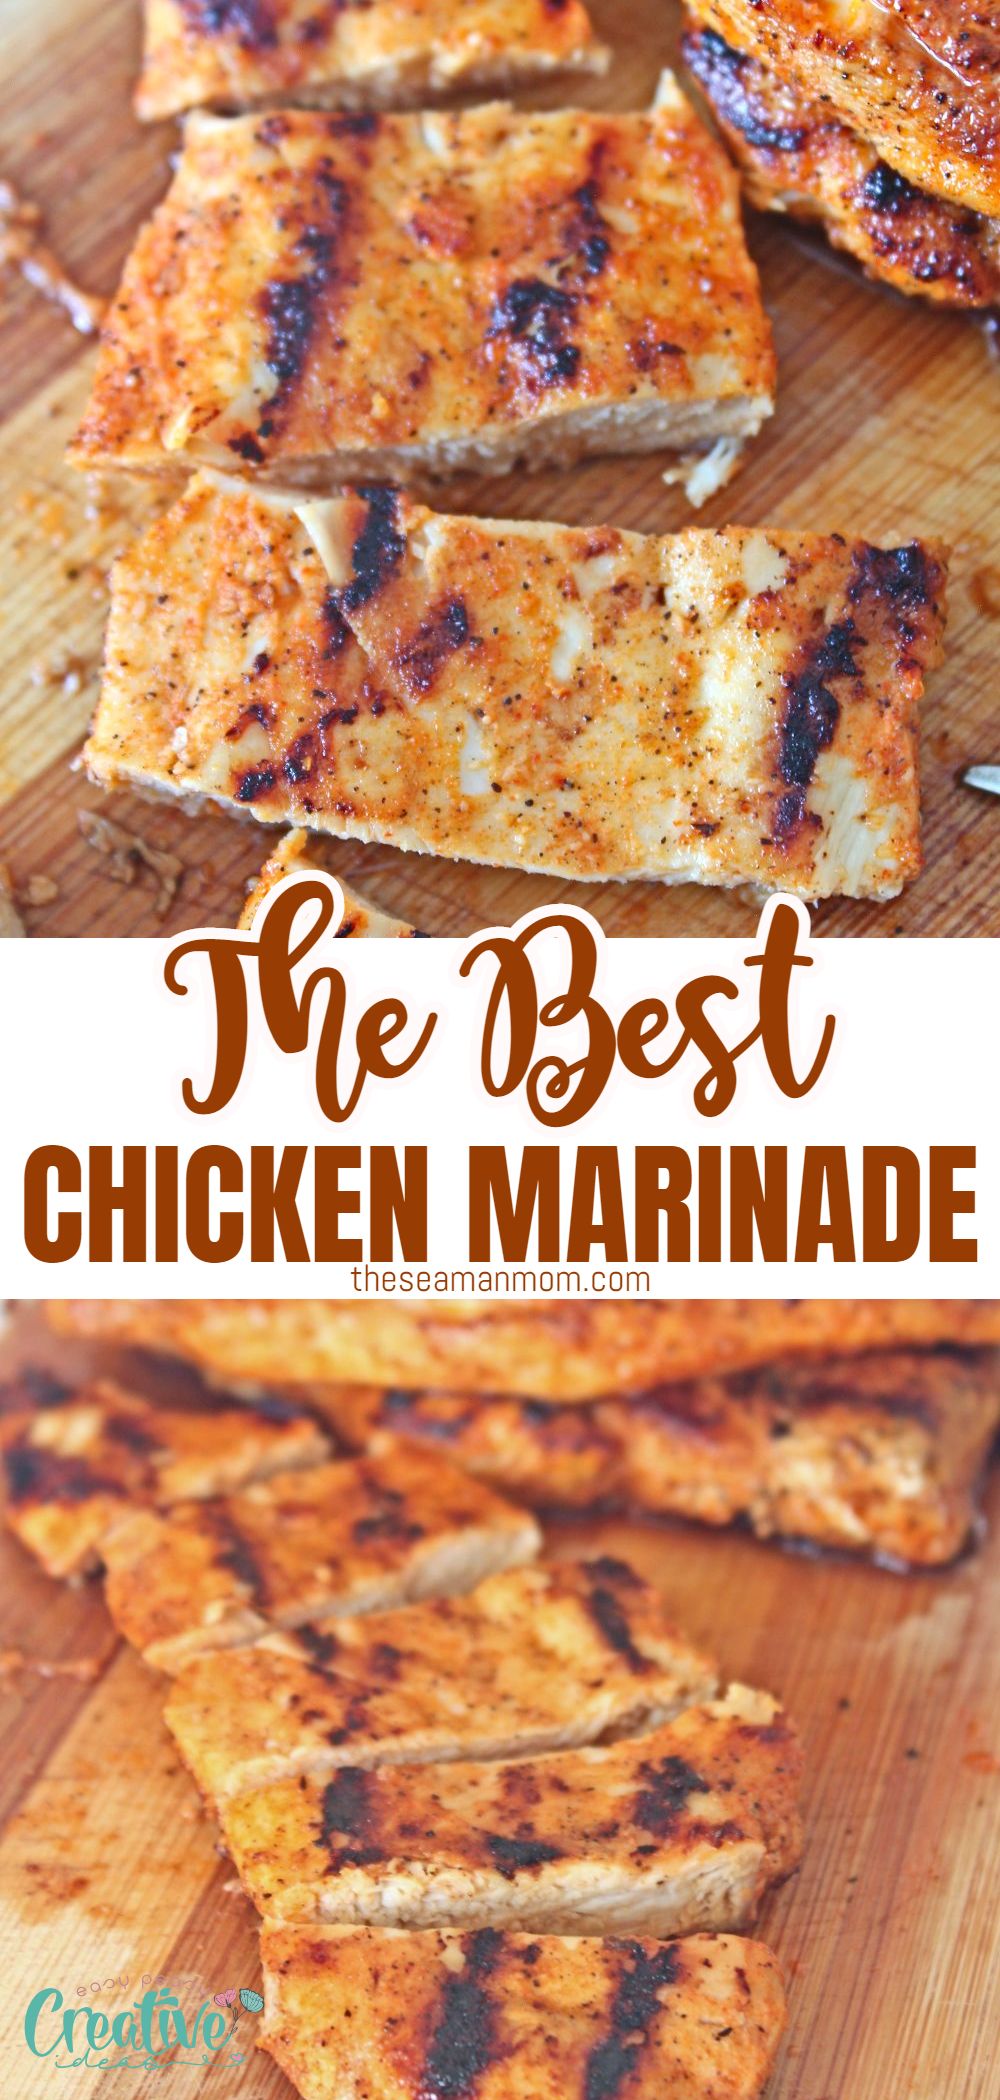 Are you looking for a new chicken marinade? You're in luck! My chicken breast marinade is made with the best ingredients to give your chicken that delicious, savory flavor and it's perfect for grilling and baking! via @petroneagu